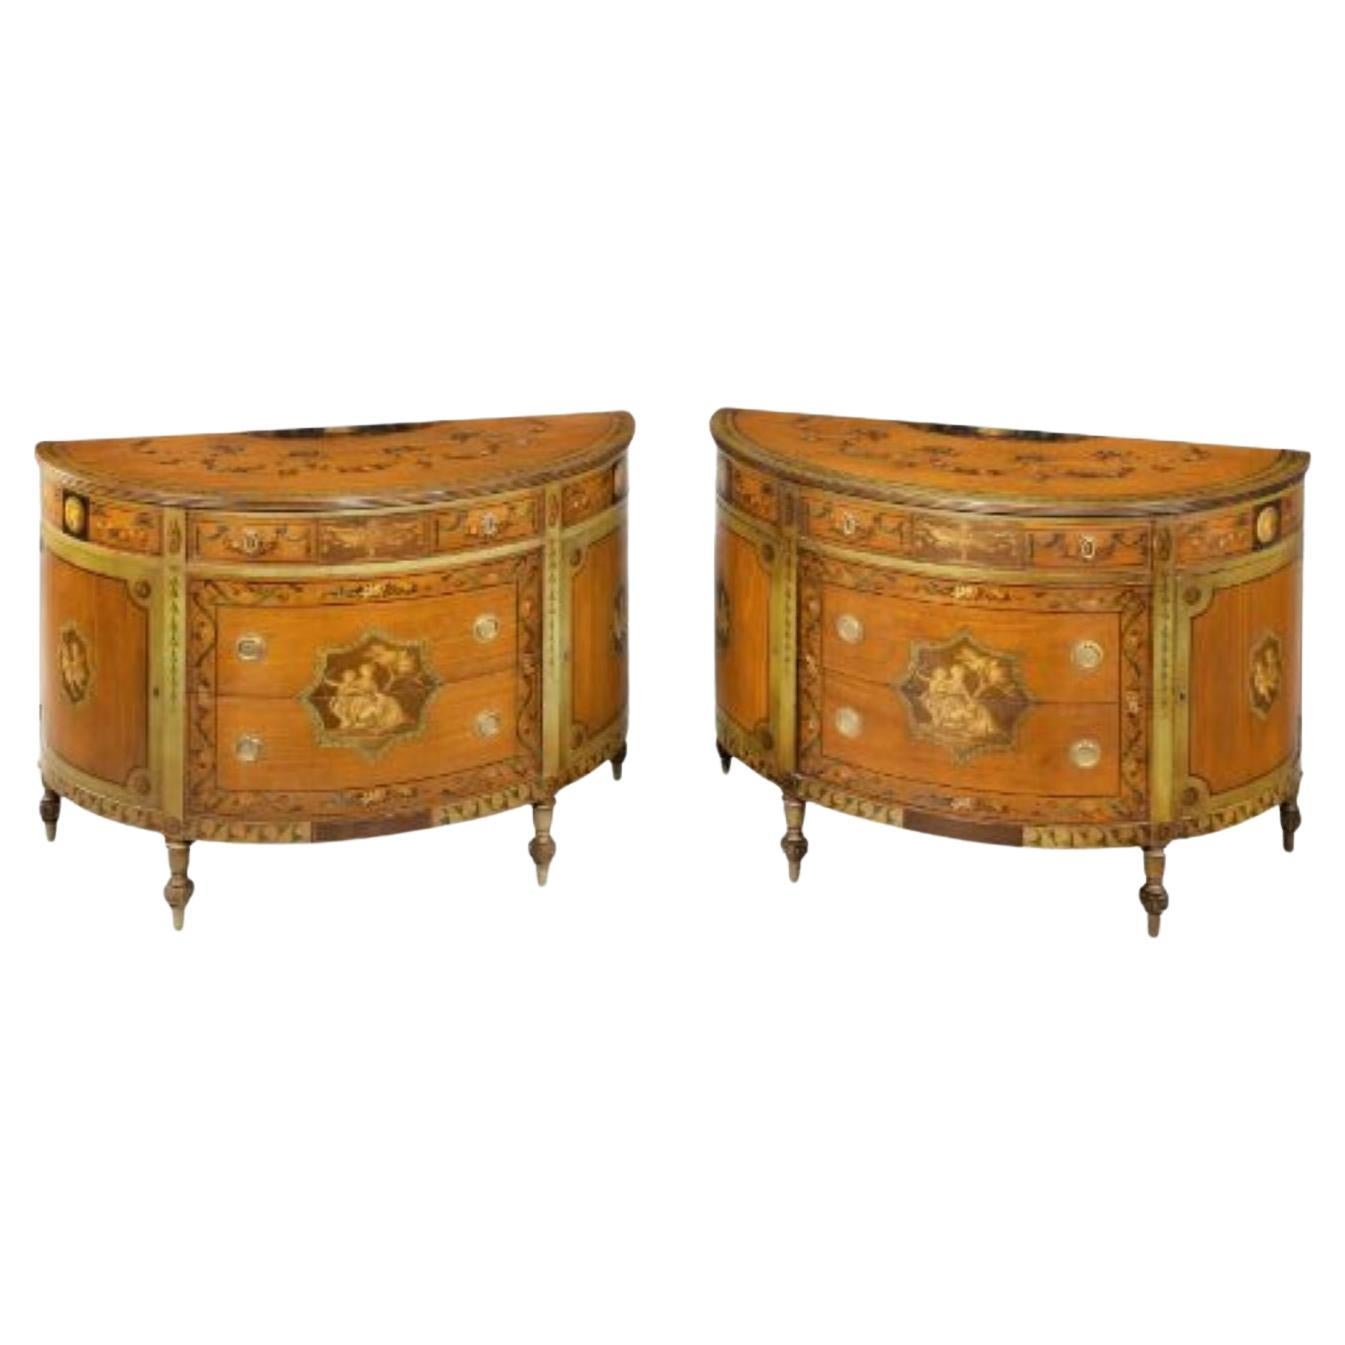 Y A Pair of Polychrome Decorated Satinwood Demi-Lune Commodes, 20th Century